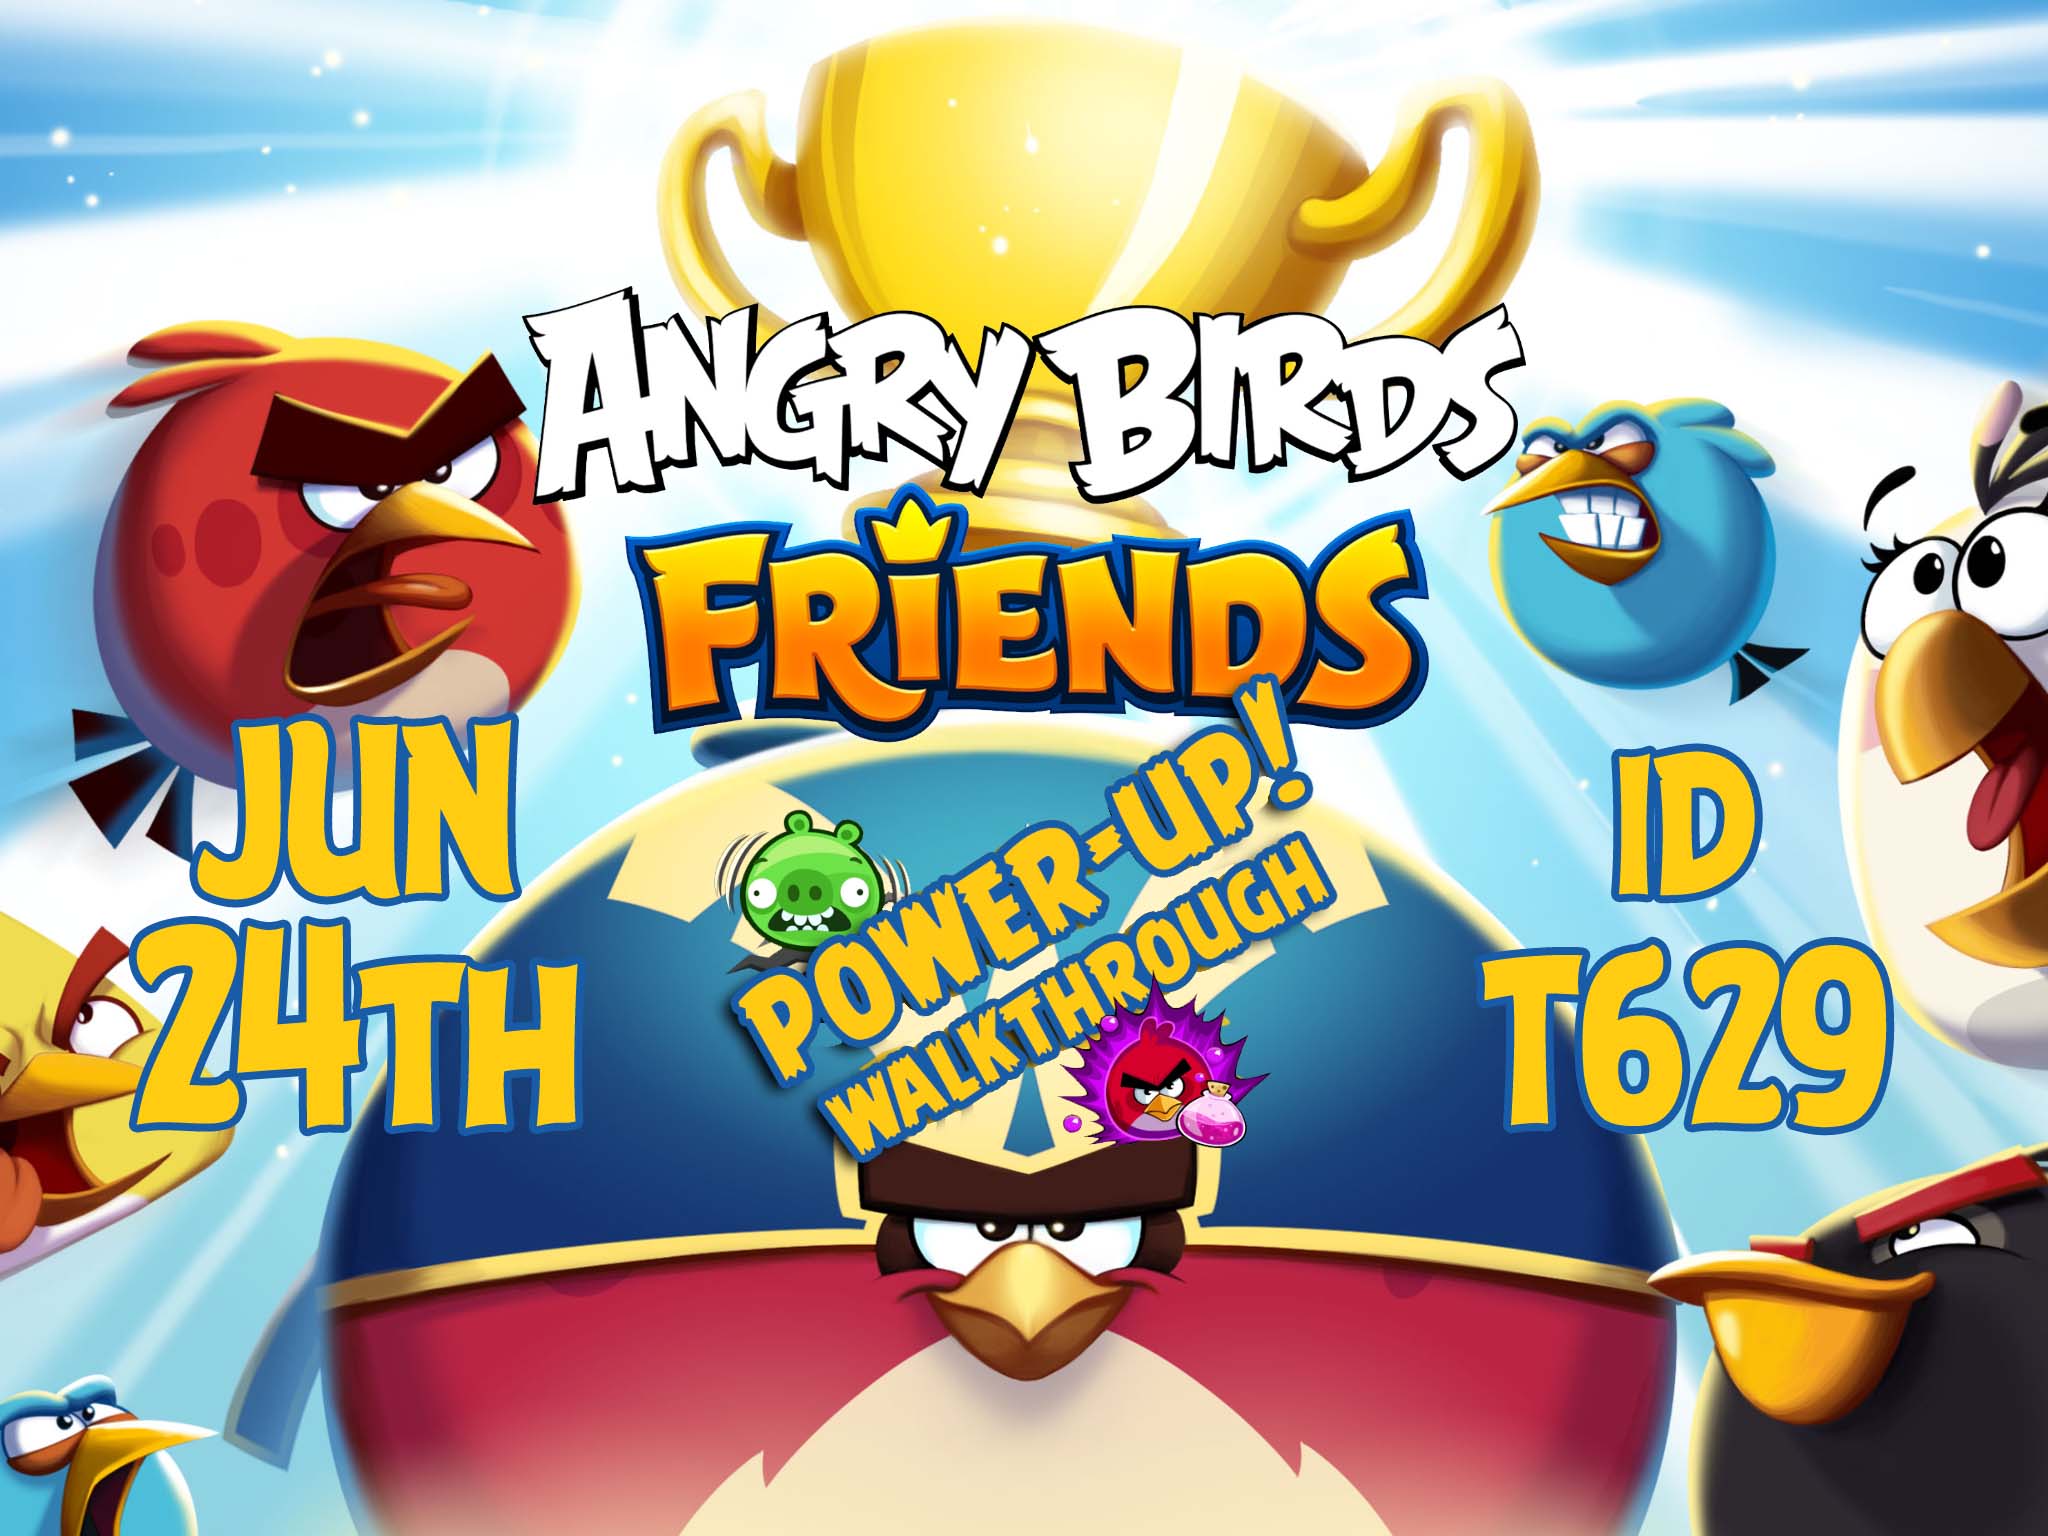 Angry-Birds-Friends-Tournament-T629-Feature-Image-PU